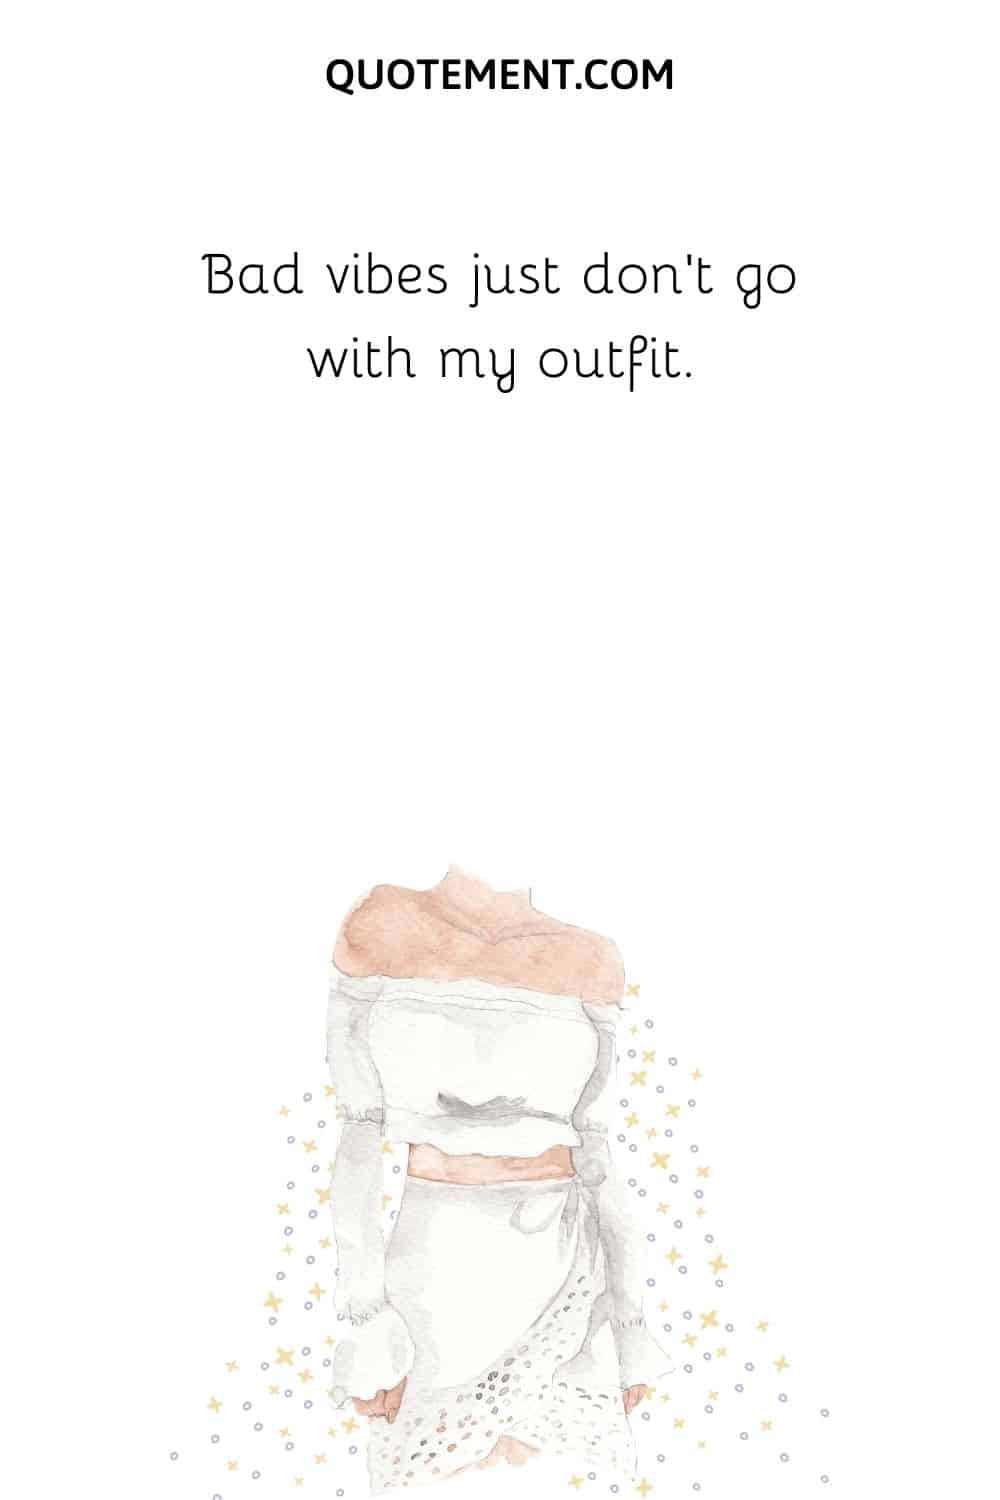 Bad vibes just don’t go with my outfit.